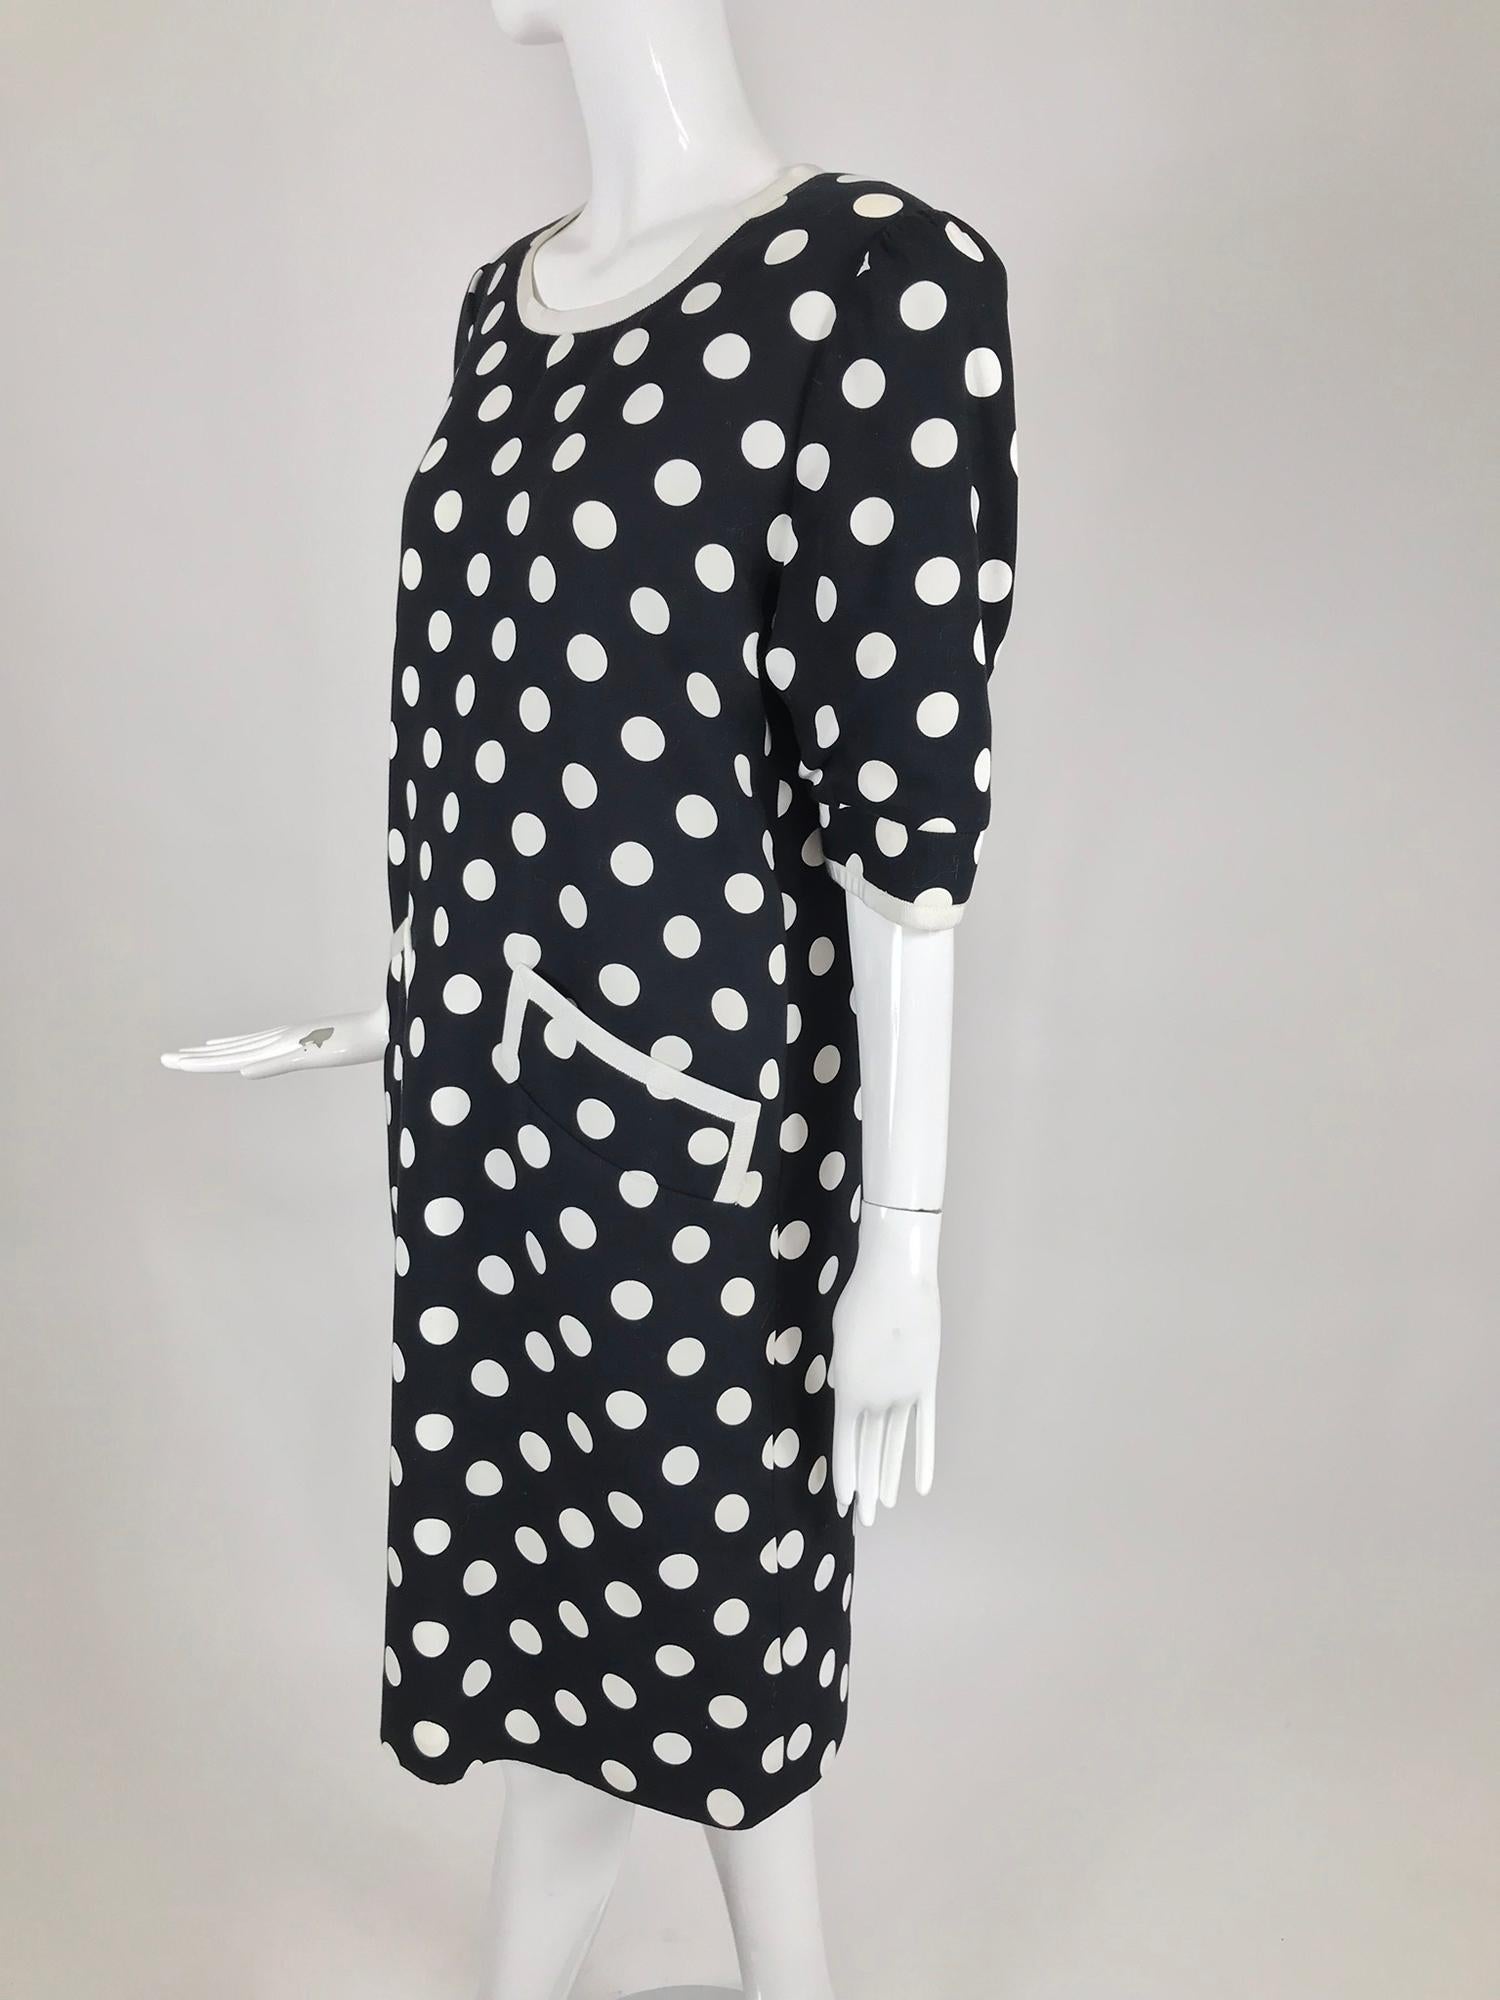 Givenchy Couture Black and White Cotton Polka Dot Day Dress 1980s For Sale 8